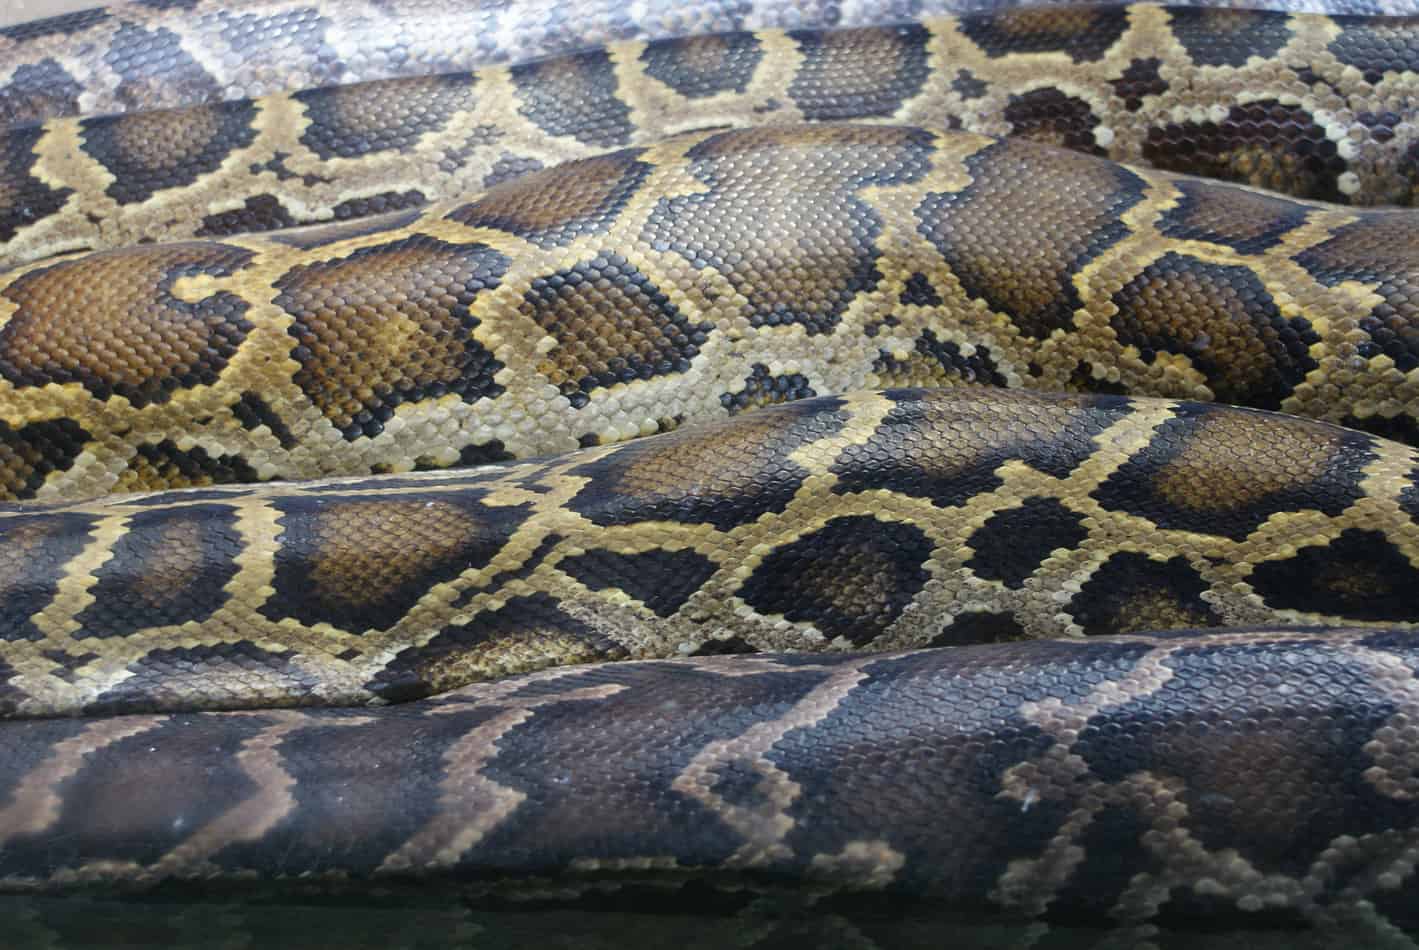 29 interesting facts about burmese pythons 7 29 Interesting Facts About Burmese Pythons (With Pictures)